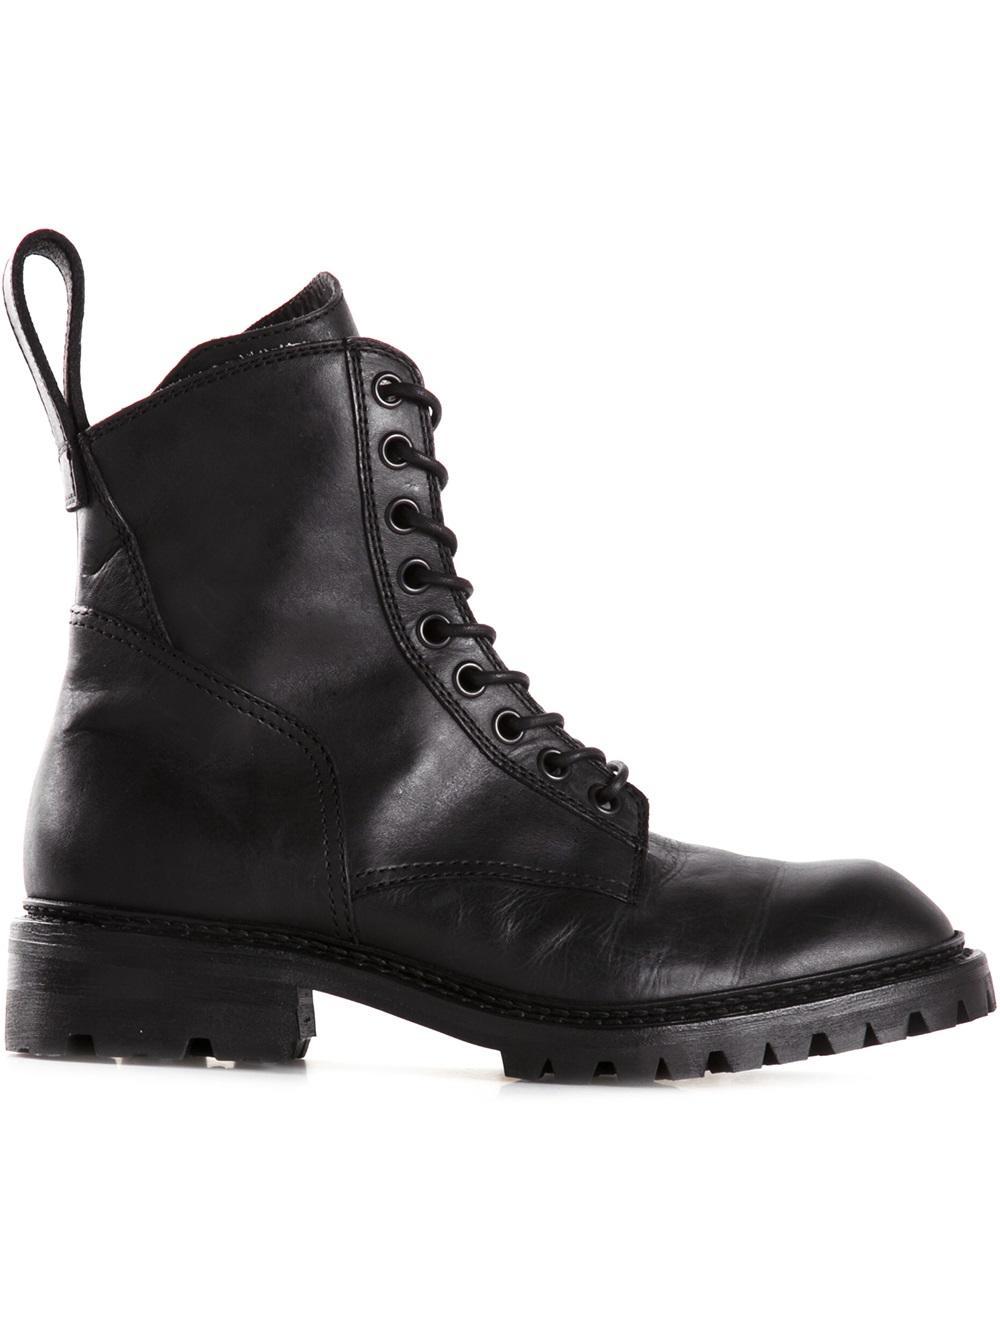 JULIUS W Side Zip Military Boots residencialchavedouro.pt